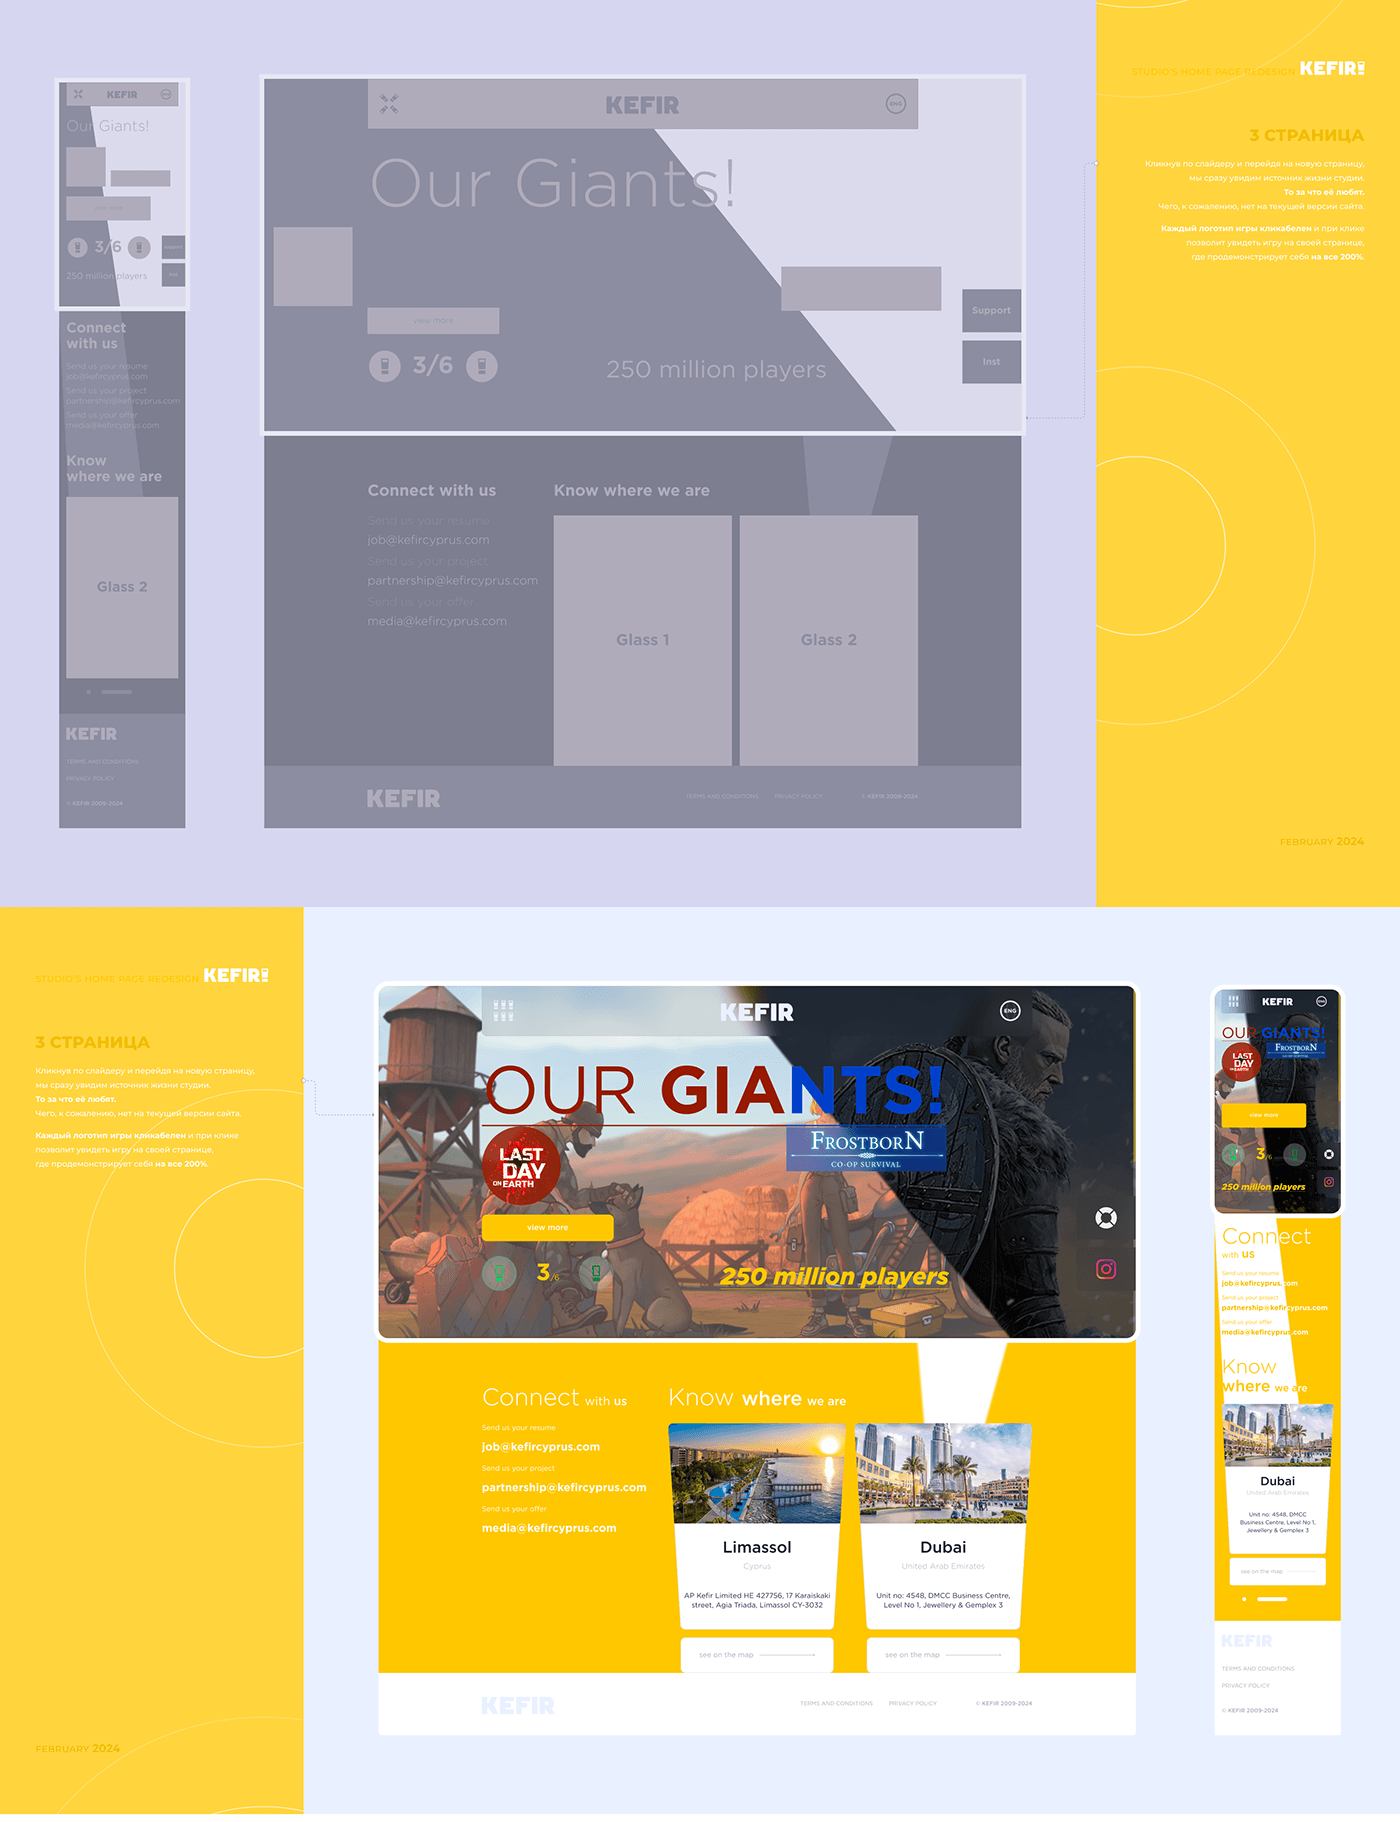 Web design ux UI user interface user experience concept